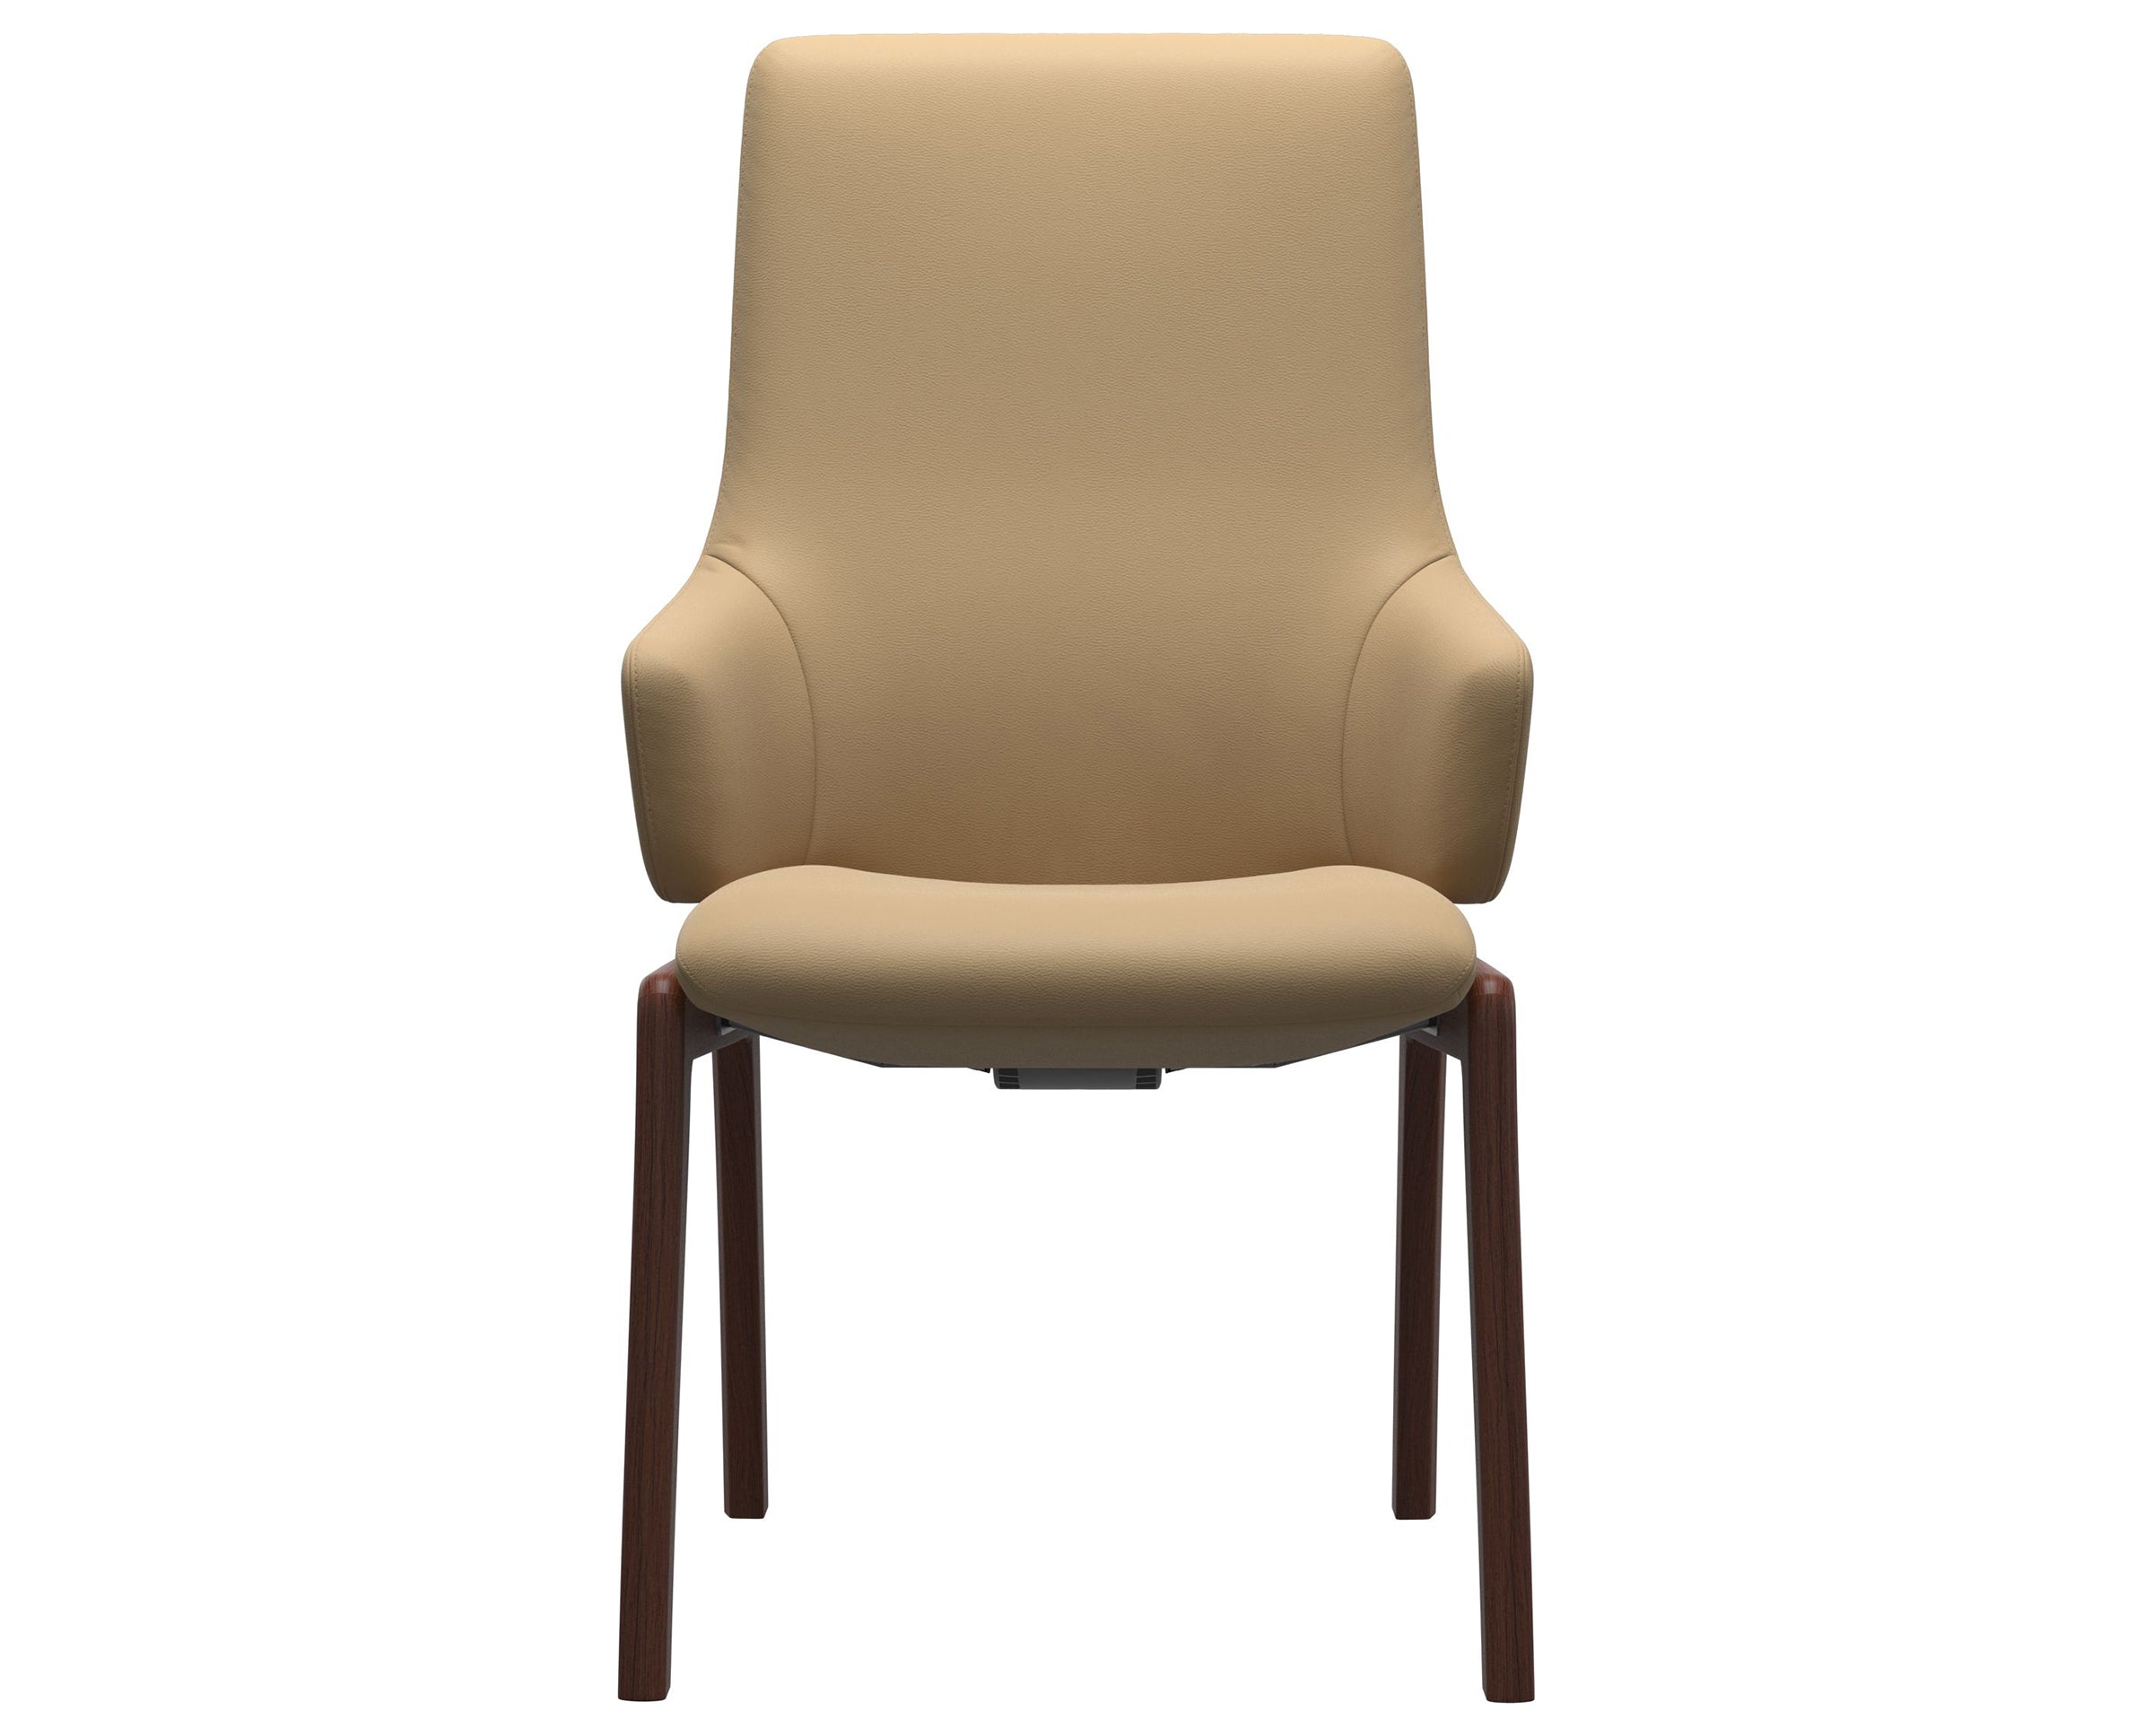 Paloma Leather Sand and Walnut Base | Stressless Laurel High Back D100 Dining Chair w/Arms | Valley Ridge Furniture